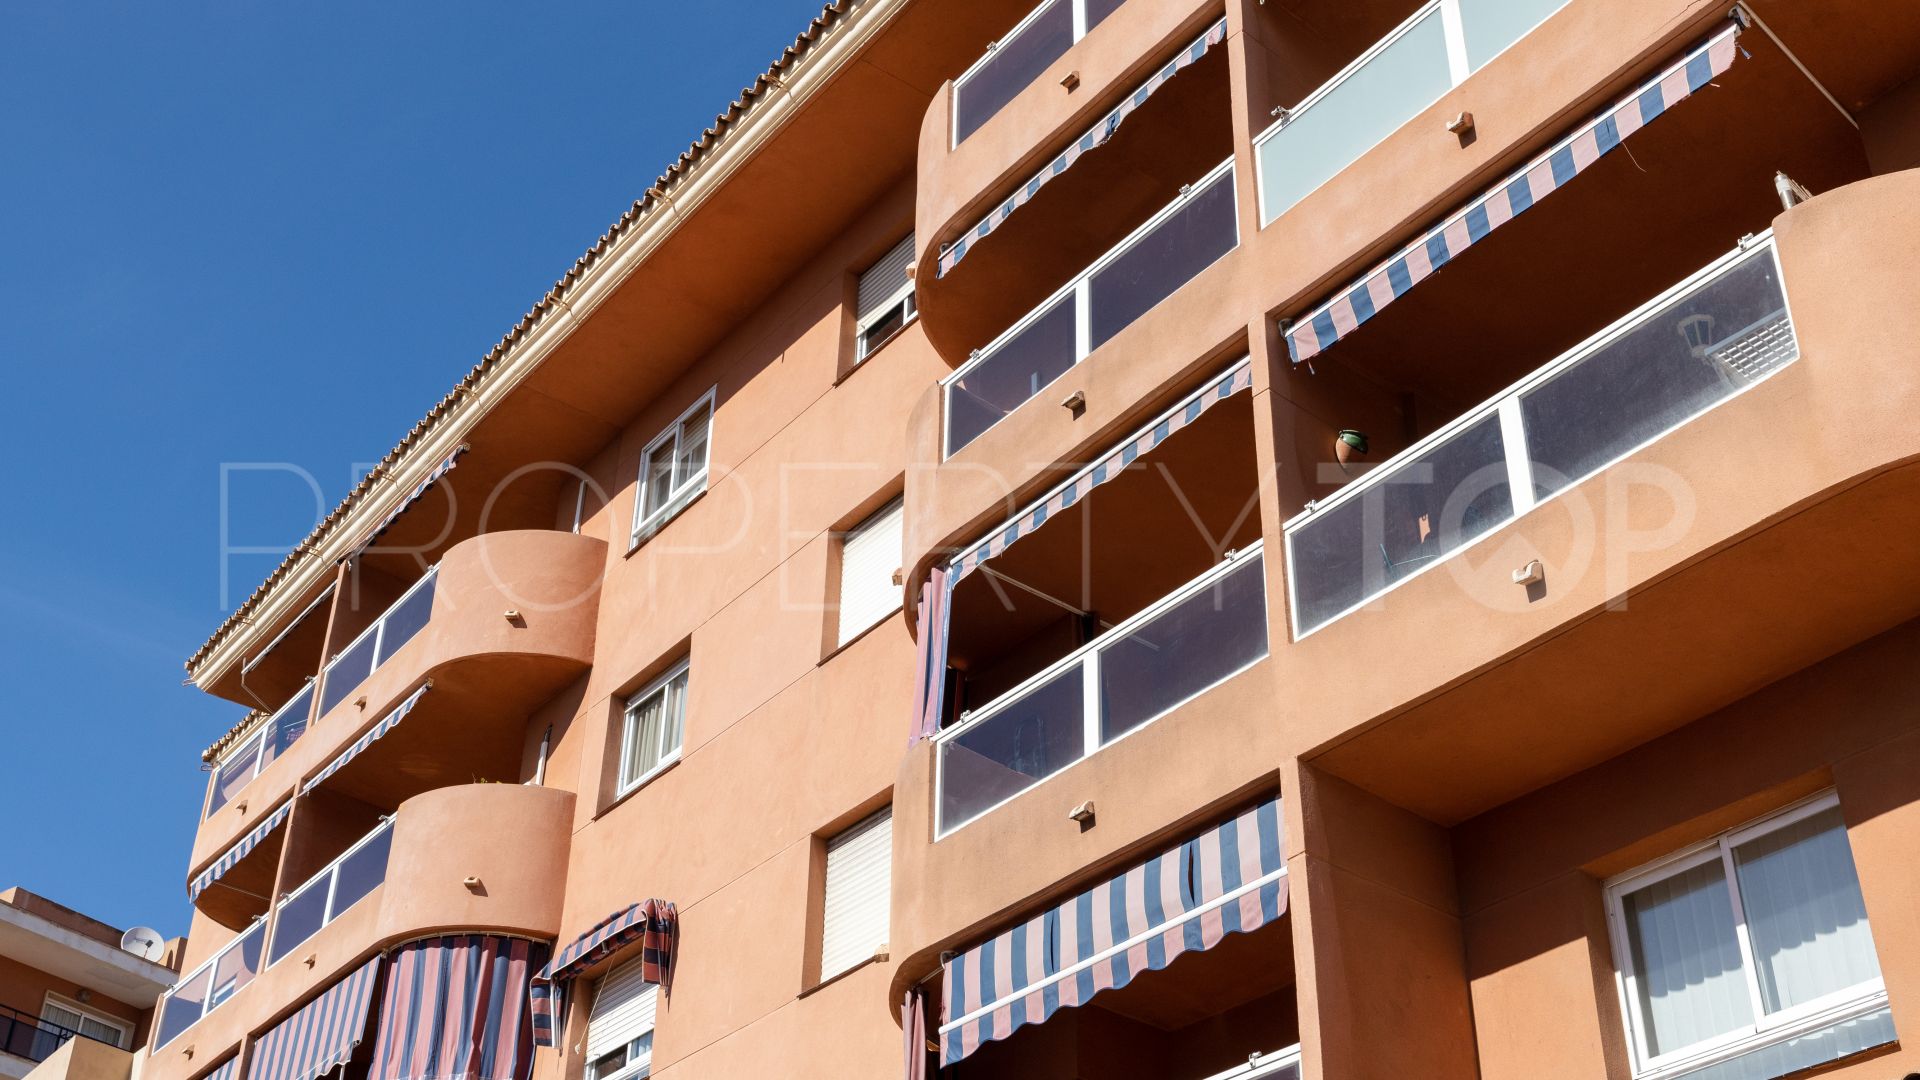 For sale apartment in Fuengirola Centro with 5 bedrooms